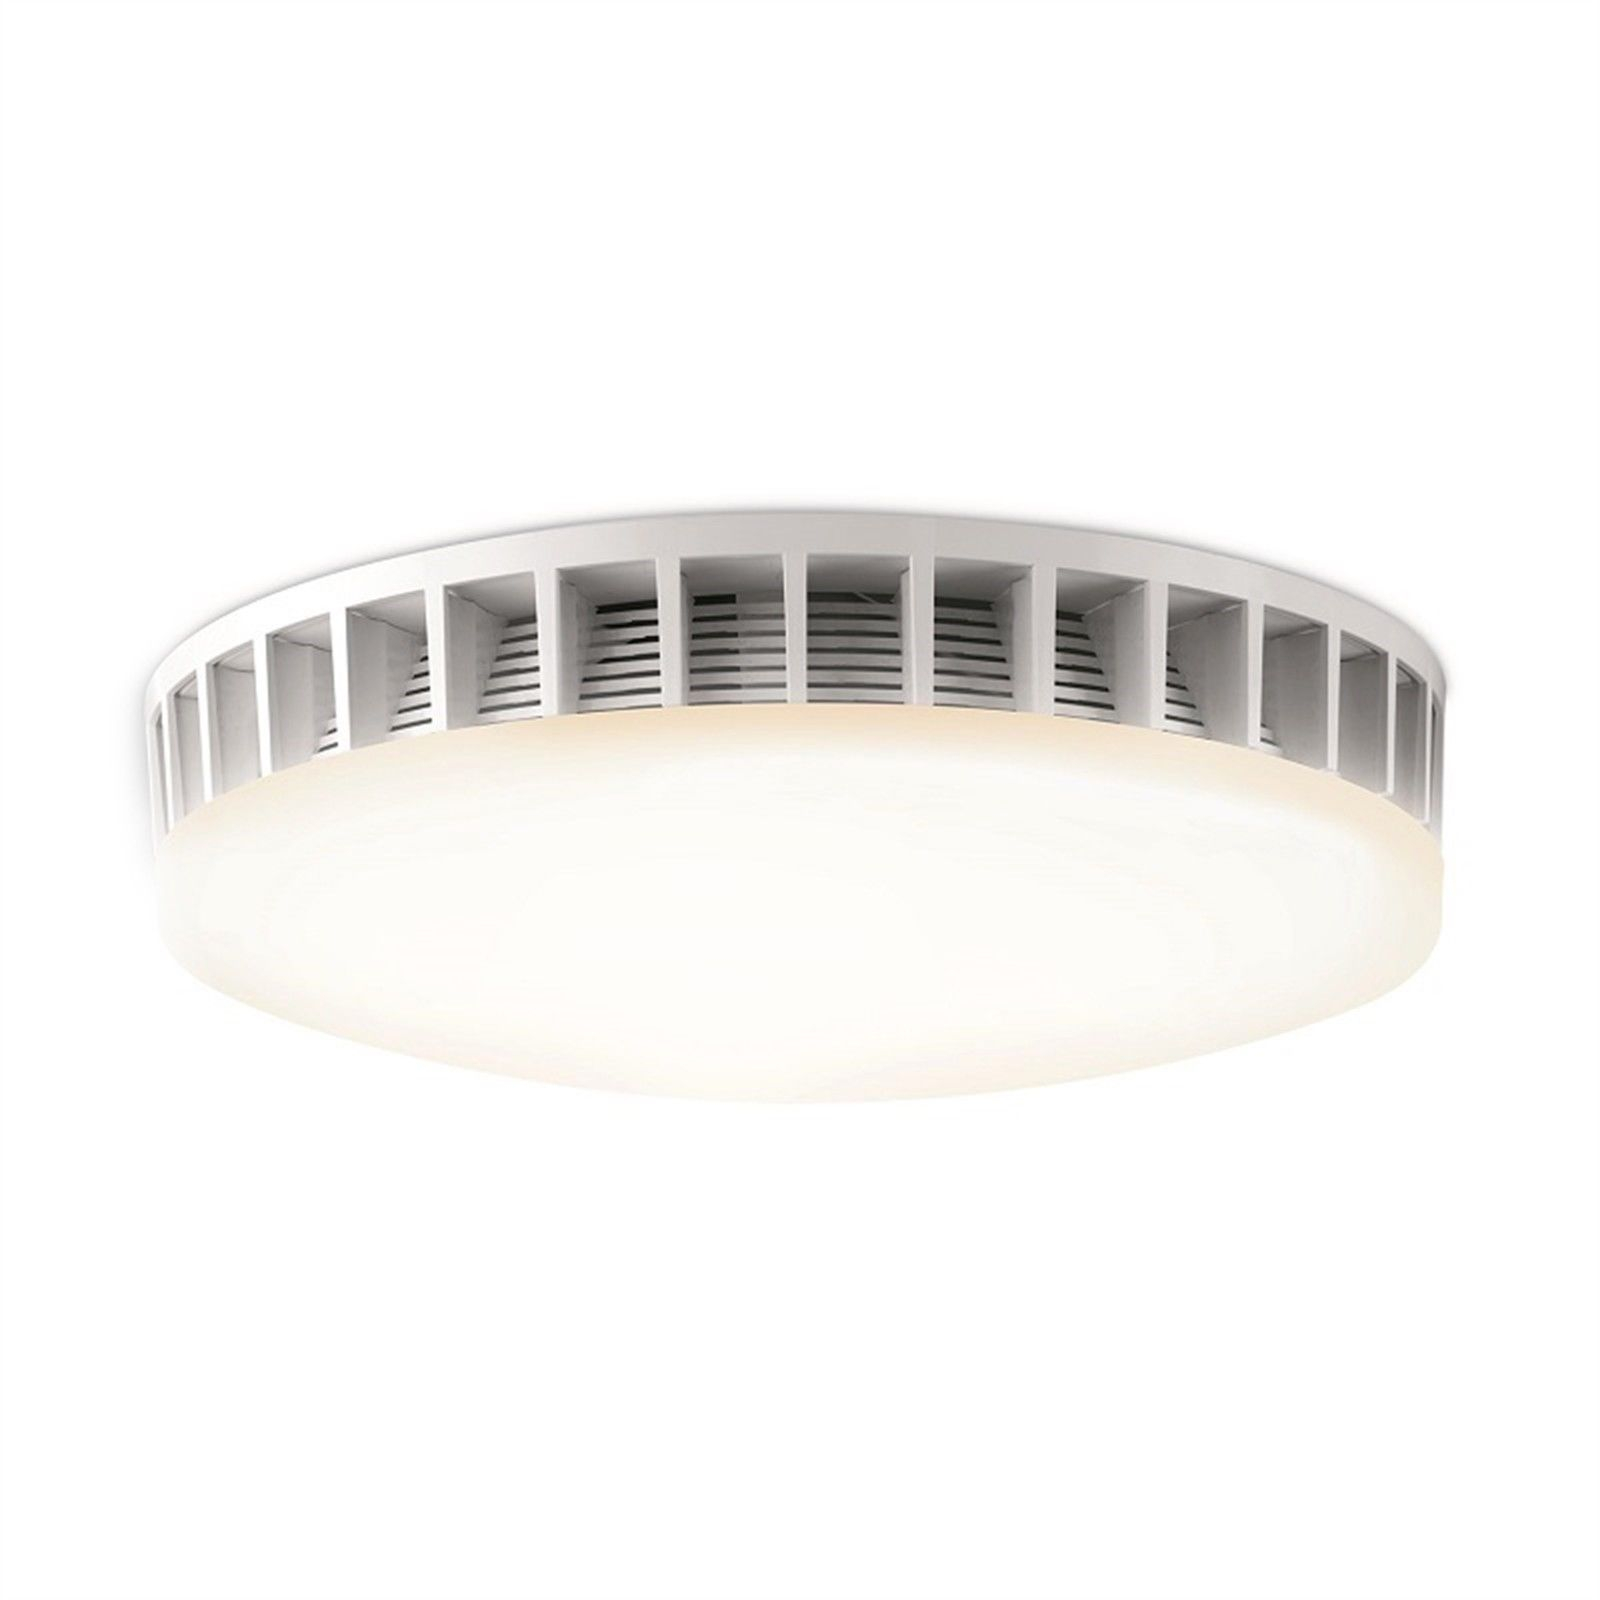 Hpm Exhaust Fan With Led Light R620led 38w 300mm Diameter Round Ceiling Mounted inside sizing 1600 X 1600